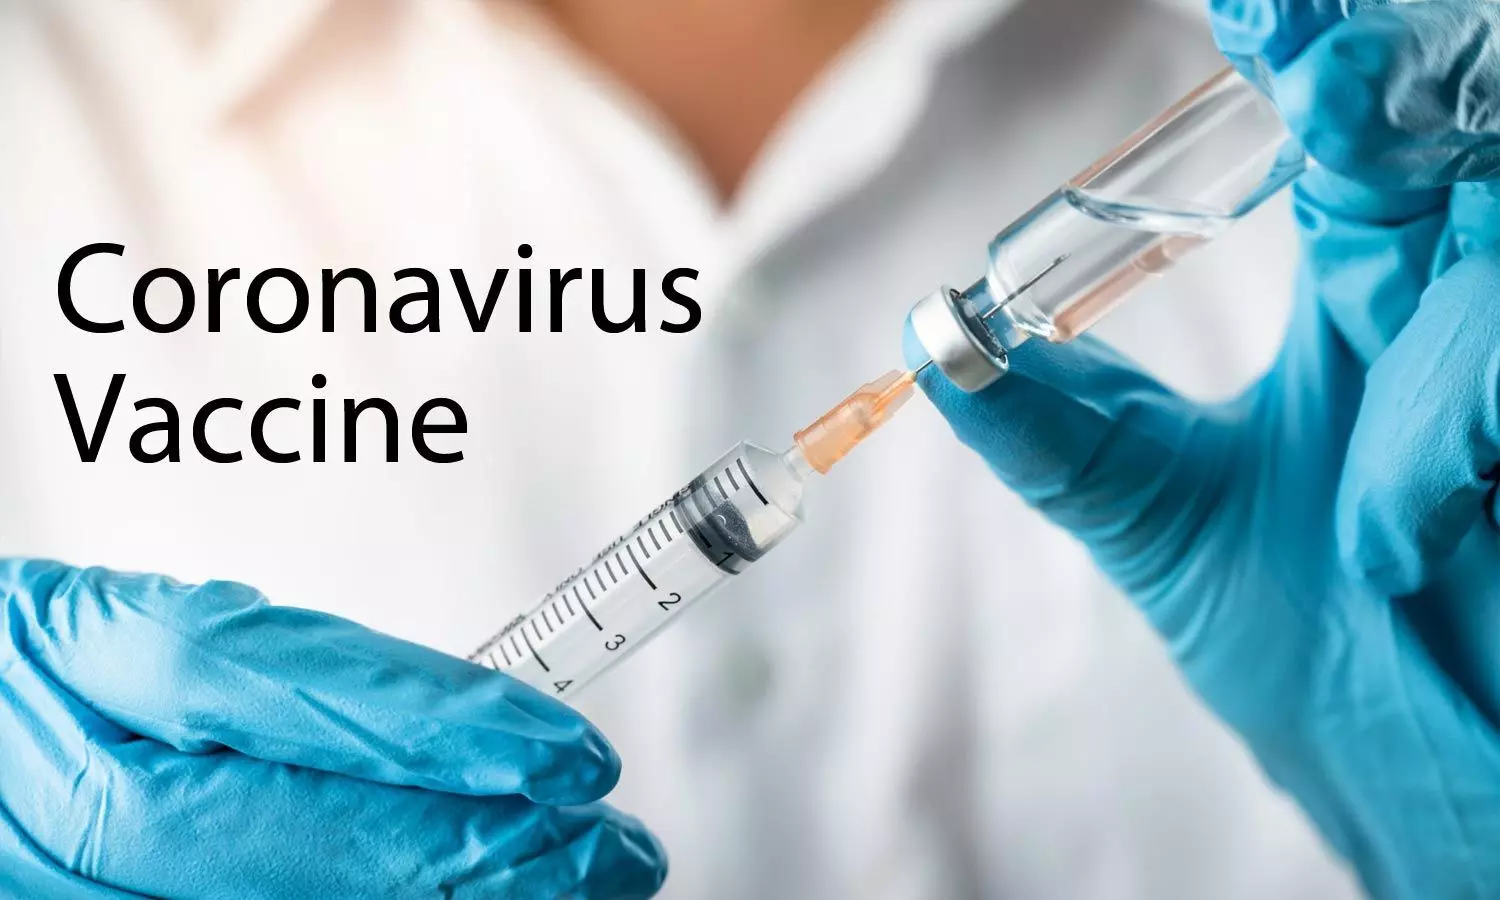 AIIMS, PGI Chandigarh among 17 trial sites for conducting human trials of COVID vaccine by Oxford